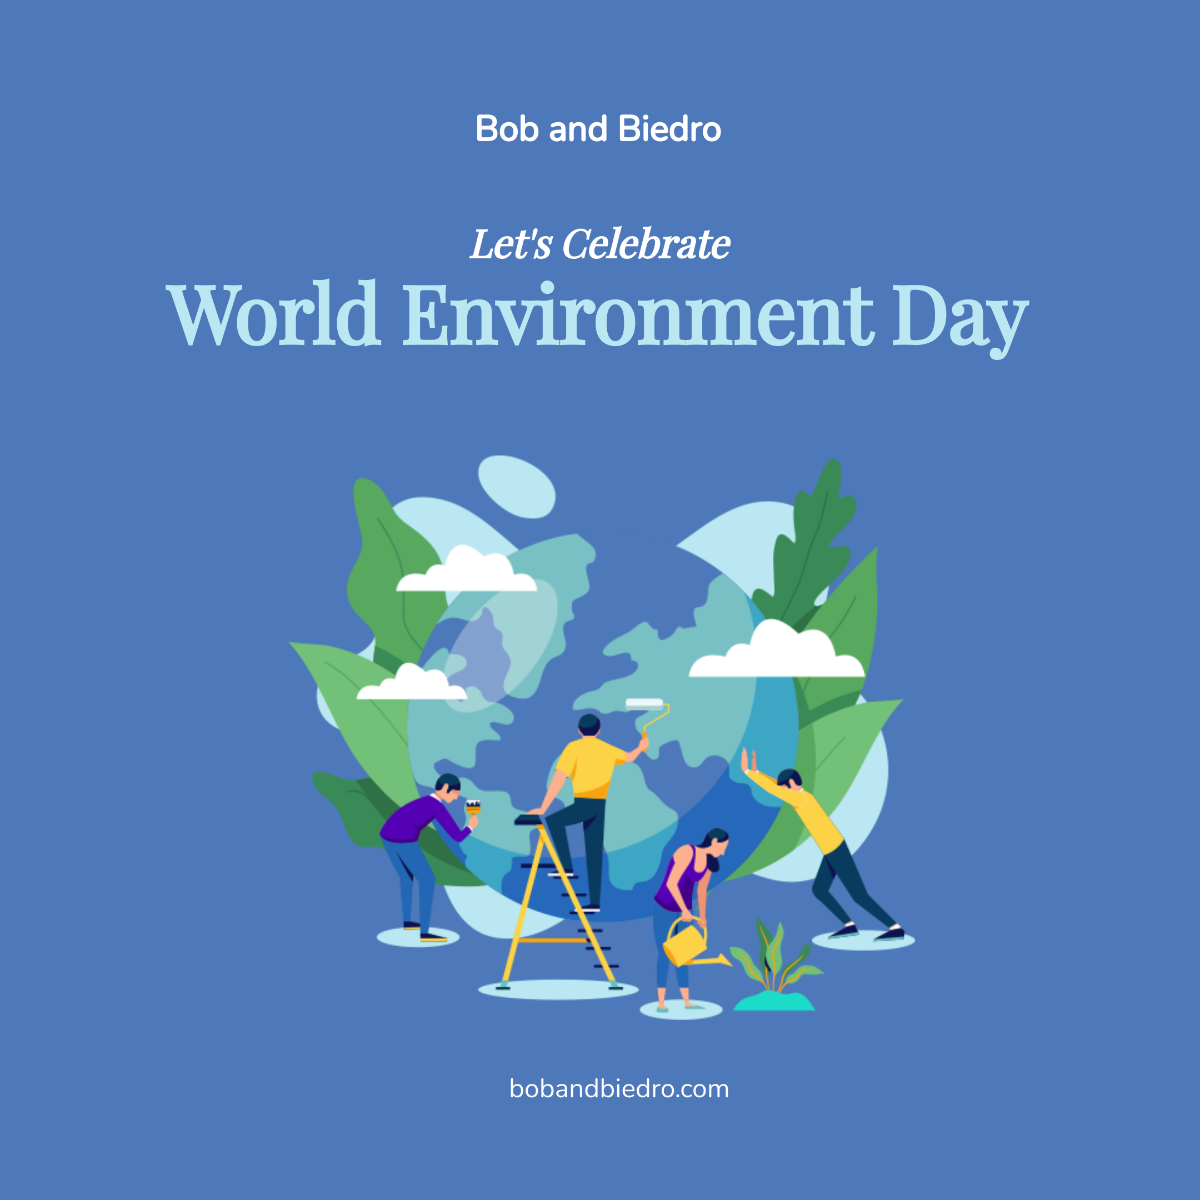 World Environment Day Instagram Post Template